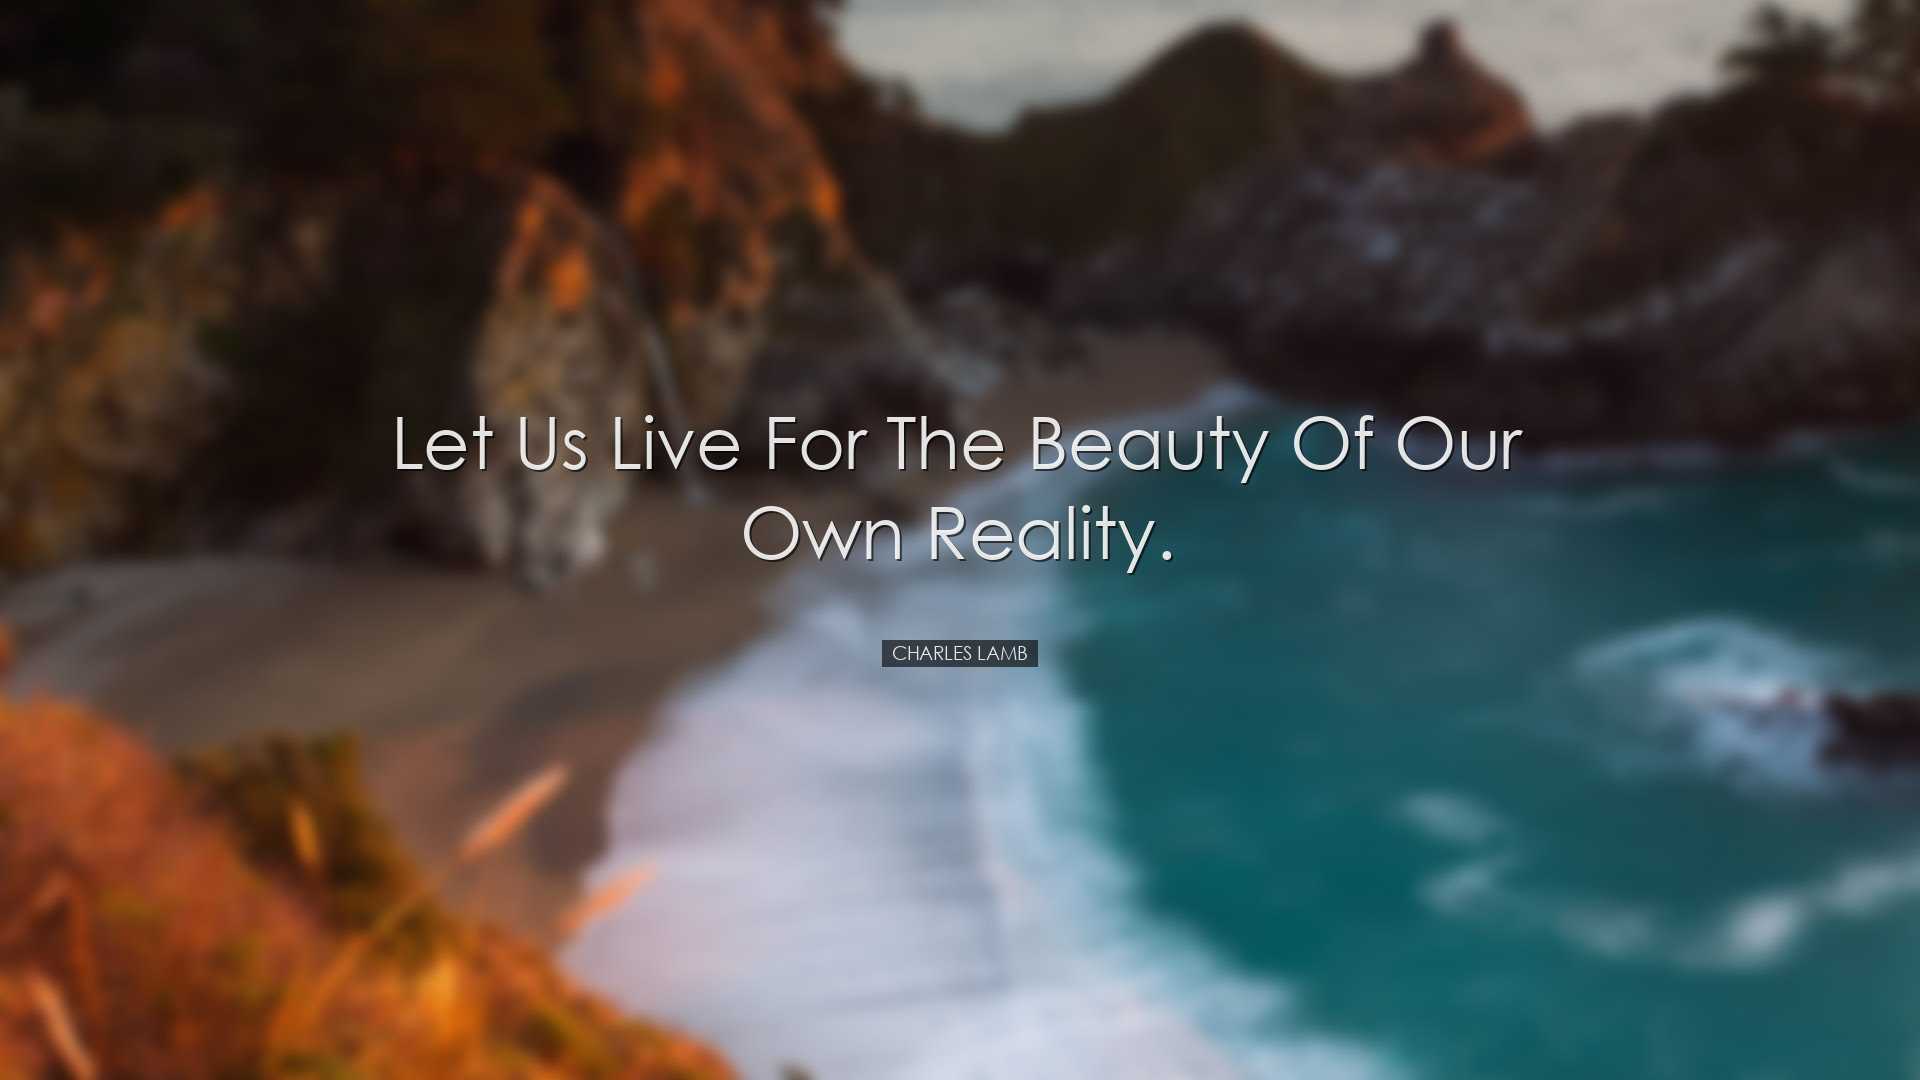 Let us live for the beauty of our own reality. - Charles Lamb